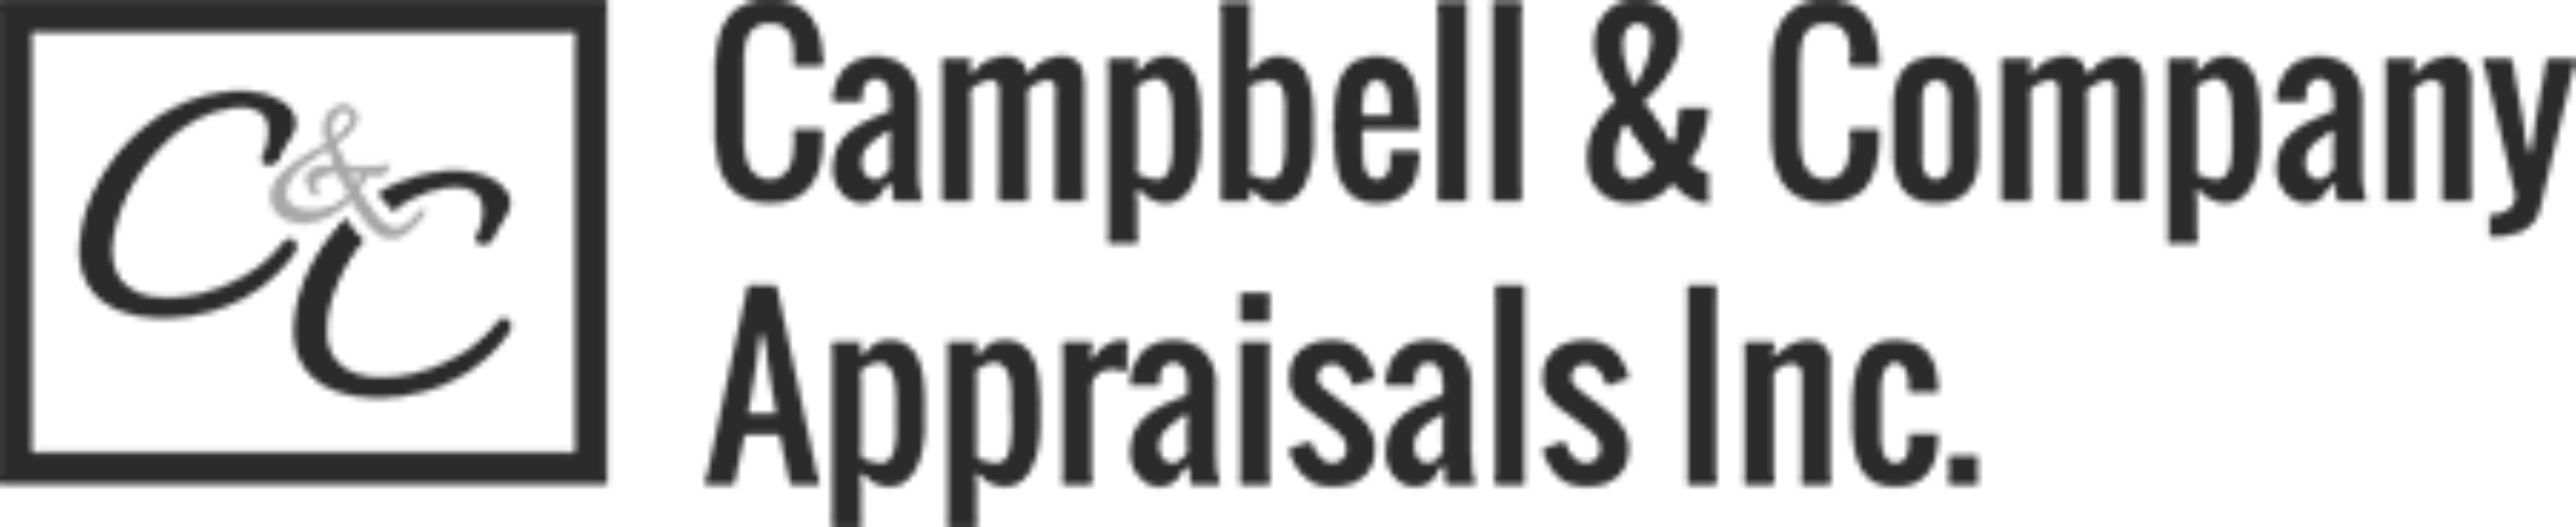 Campbell-and-Company-Appraisals-logo-bw